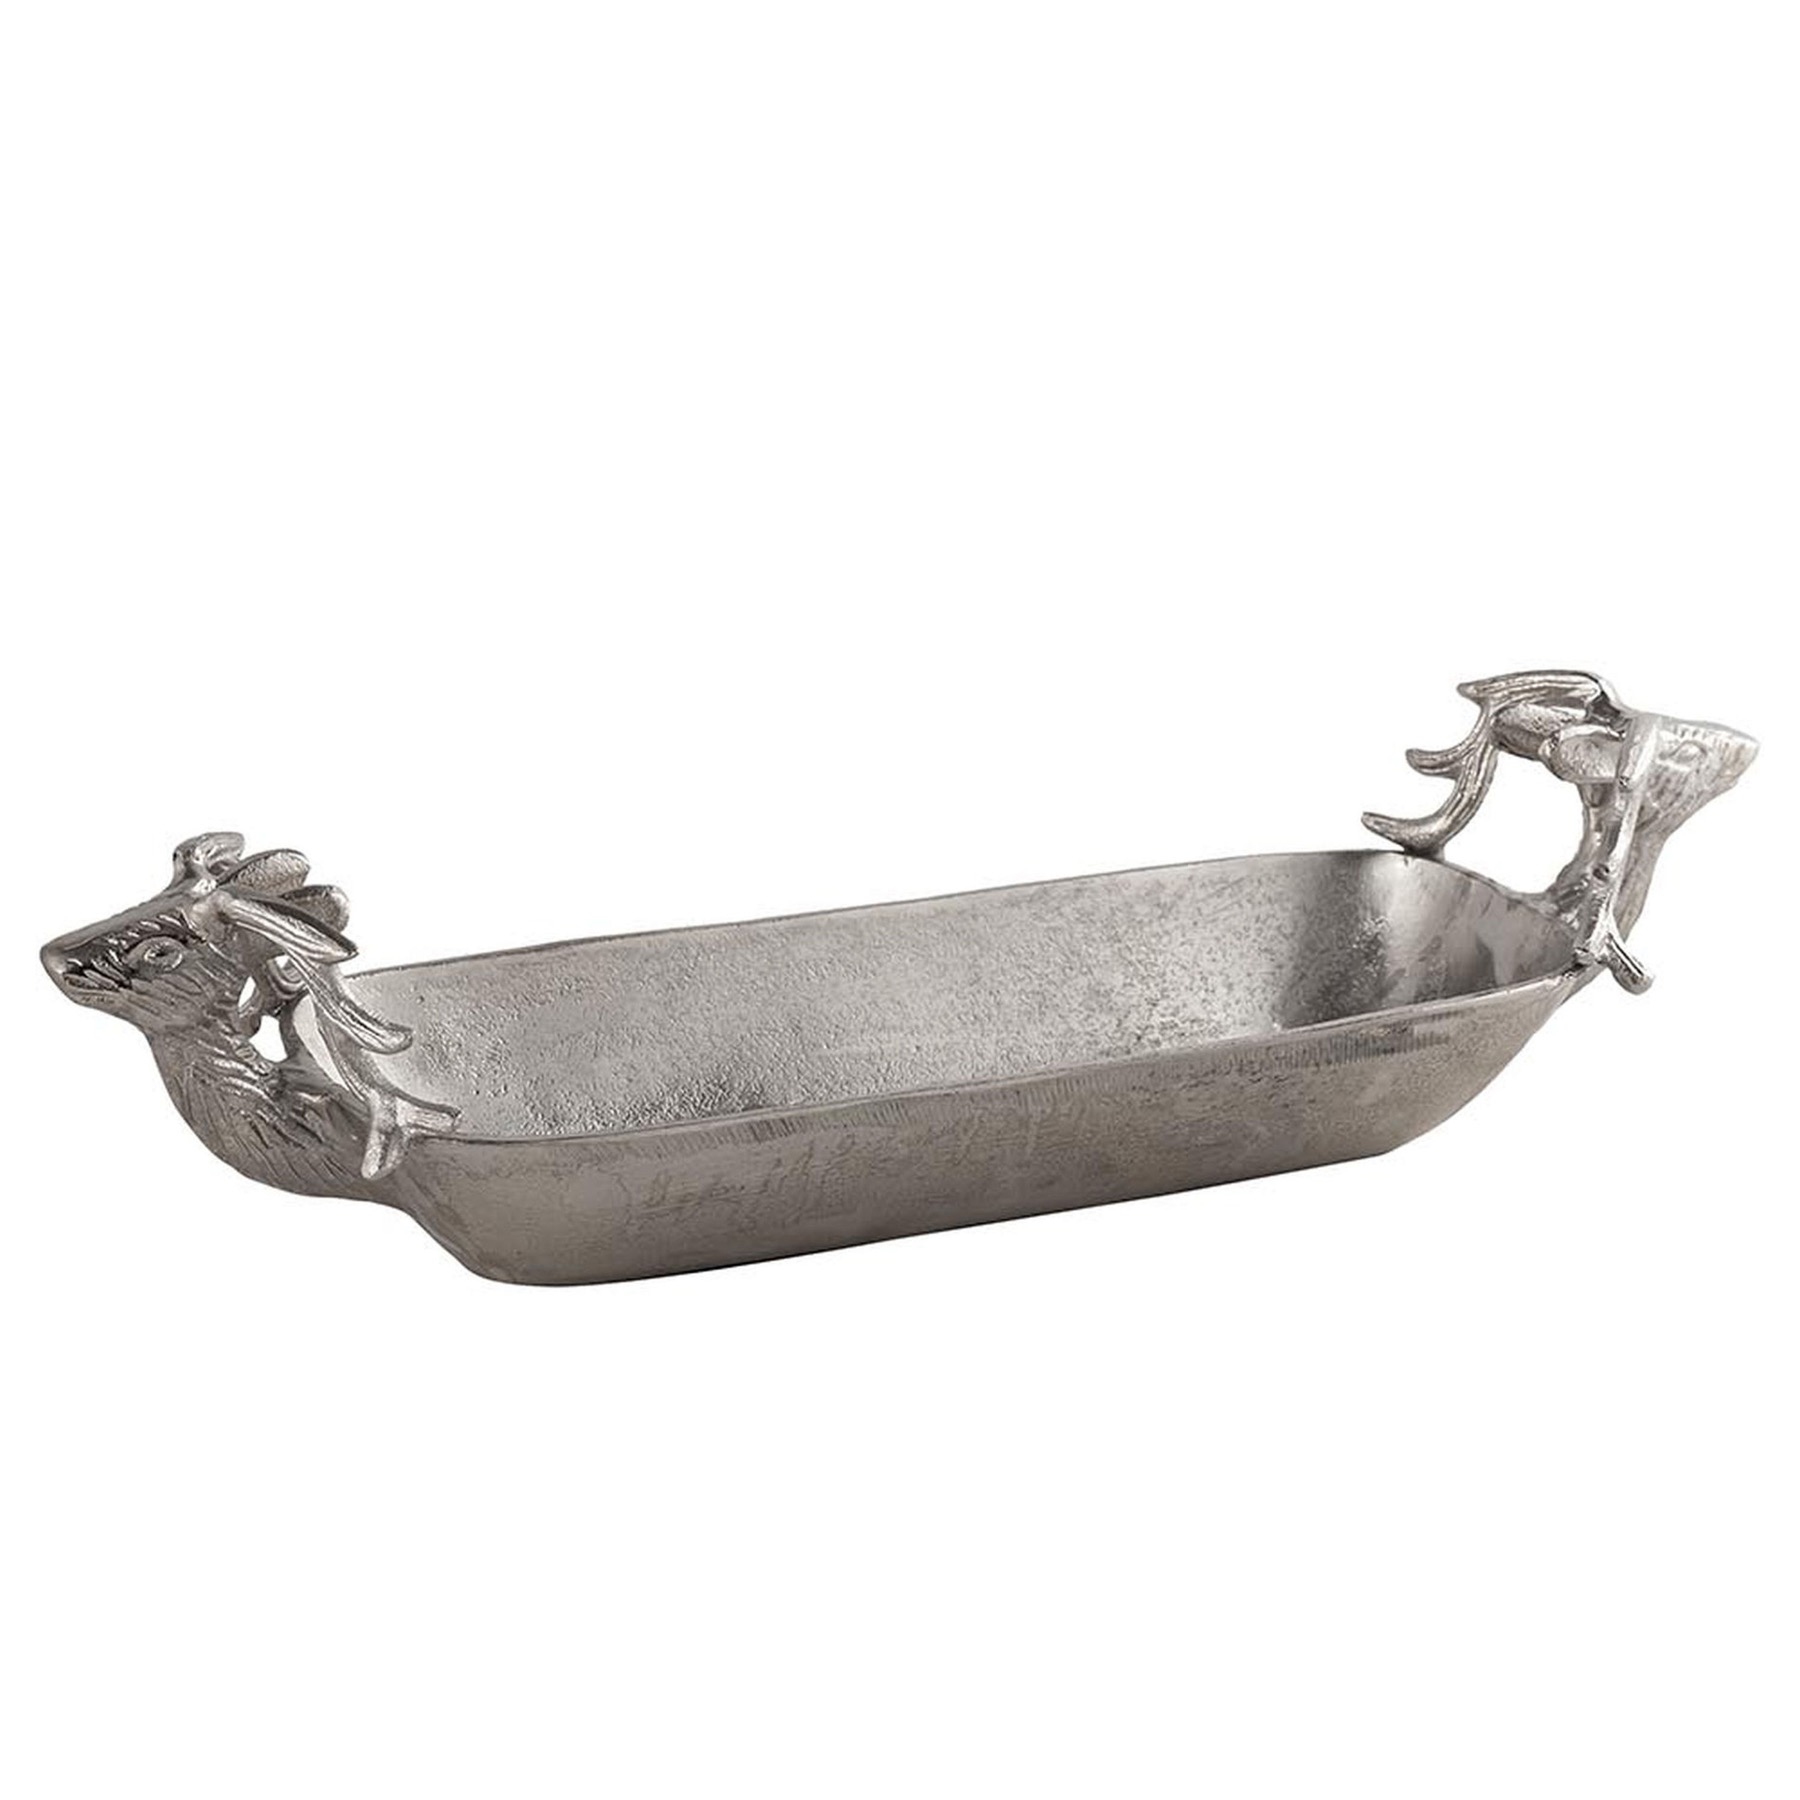 Farrah Collection Silver Deer Display Tray - Image 1